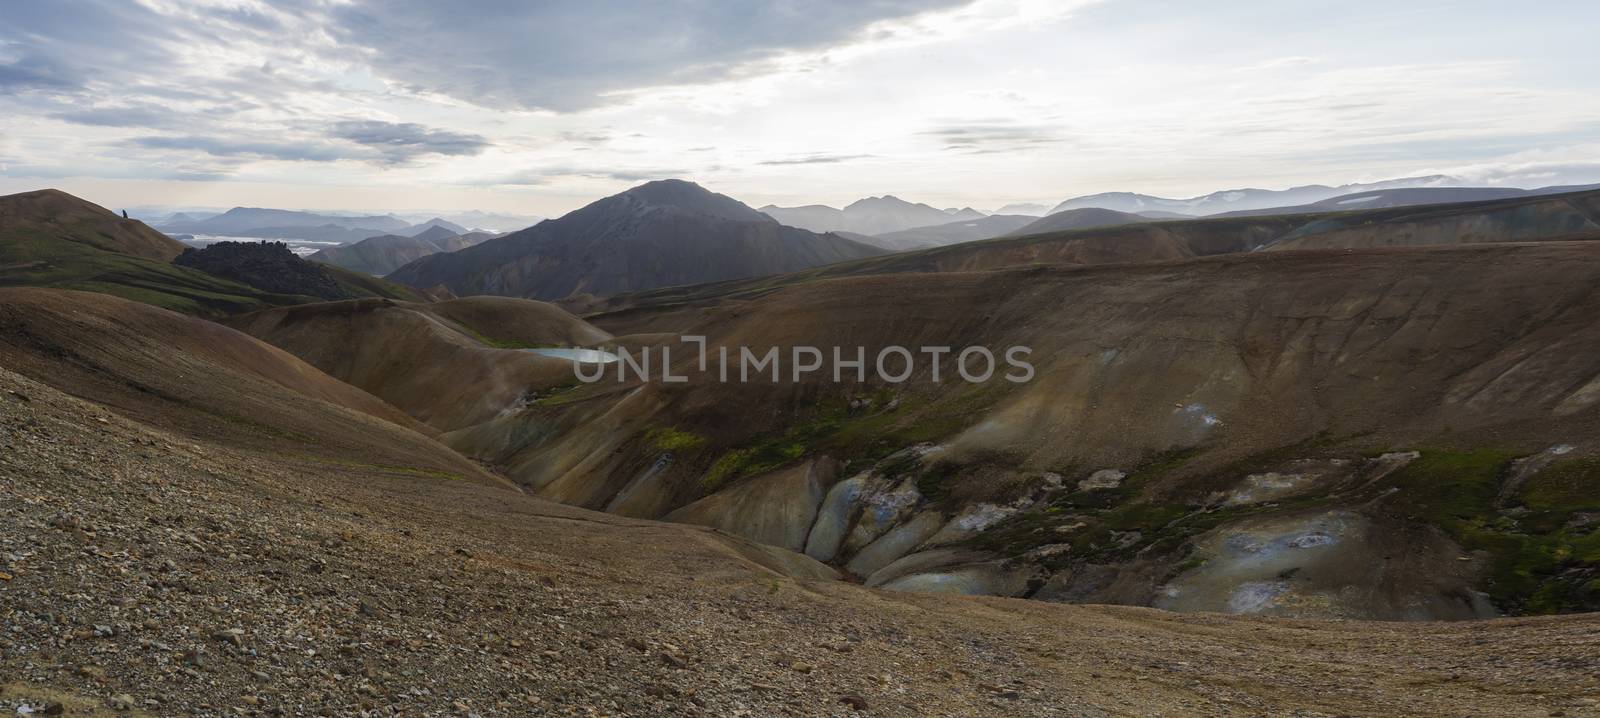 Colorful Rhyolit mountain panorma with multicolored volcanos and geothermal fumarole and river delta. Sunrise in Landmannalaugar at Fjallabak Nature Reserve, Highlands Iceland.